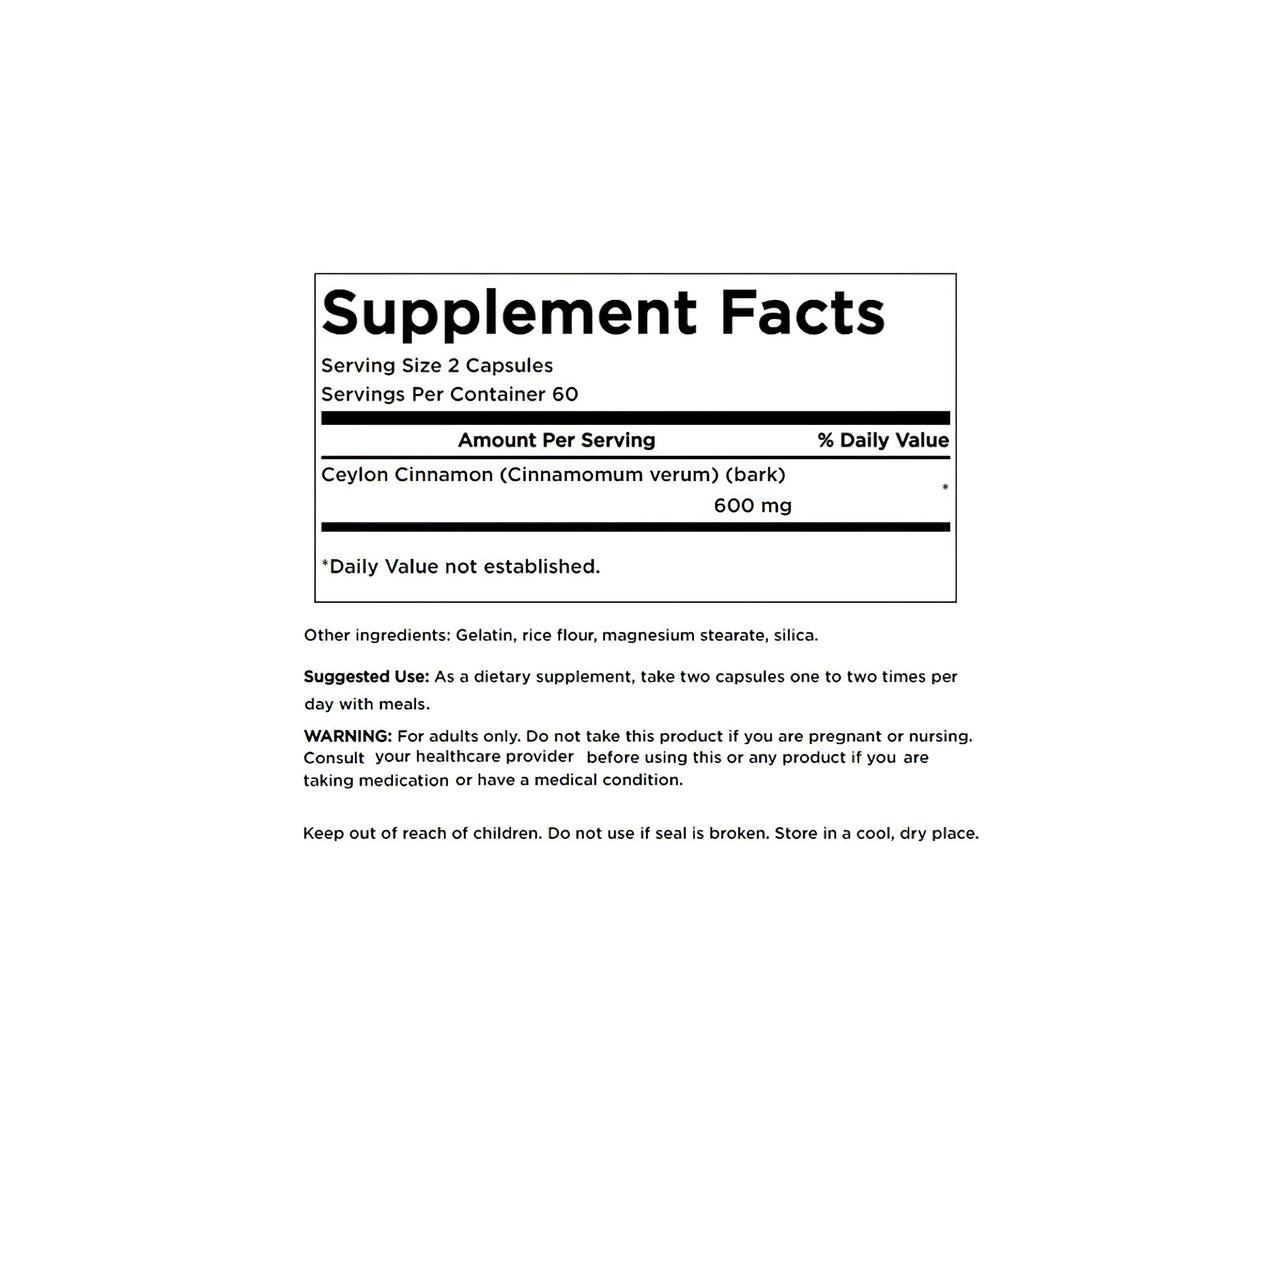 The True Cinnamon - 300 mg 120 capsules Ceylon Cinnamon supplement facts label on a white background containing information about metabolic support and cardiovascular health is produced by the brand Swanson.